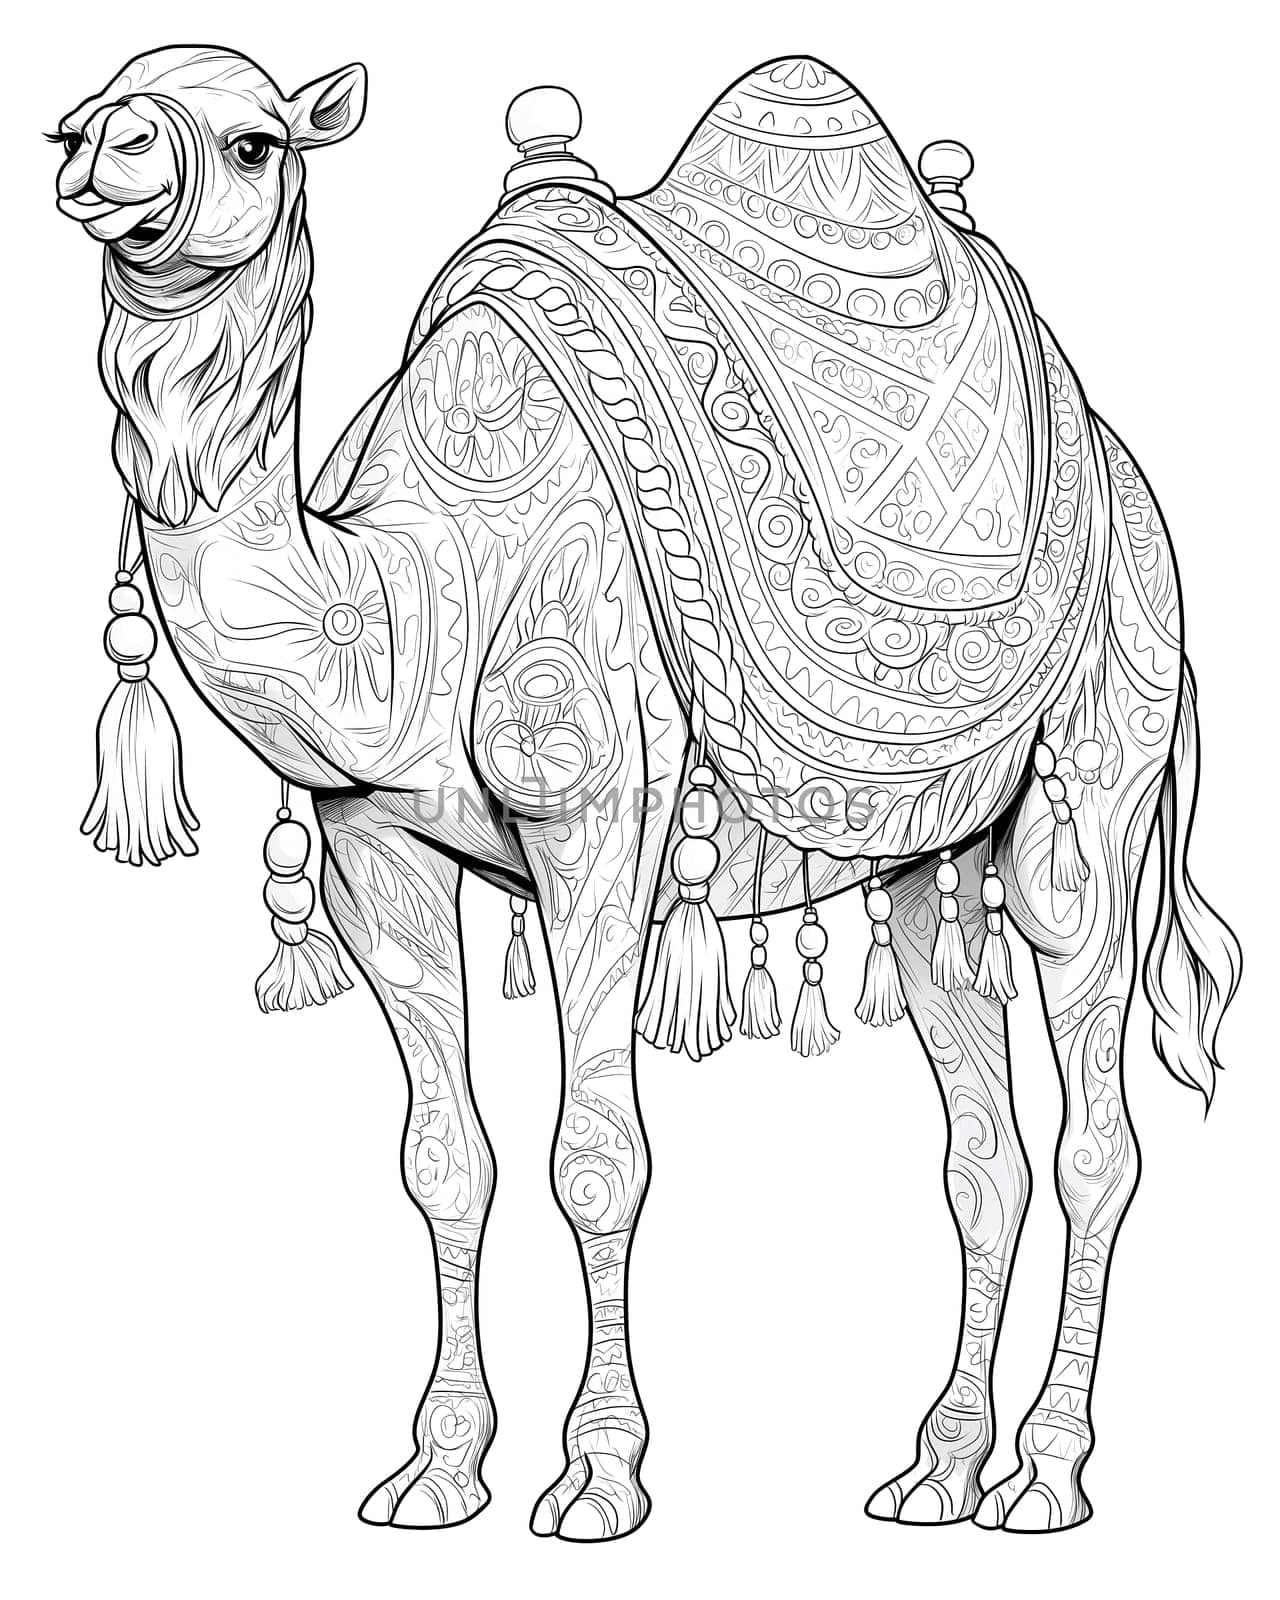 Coloring book for children, coloring animal, camel. Selective soft focus.